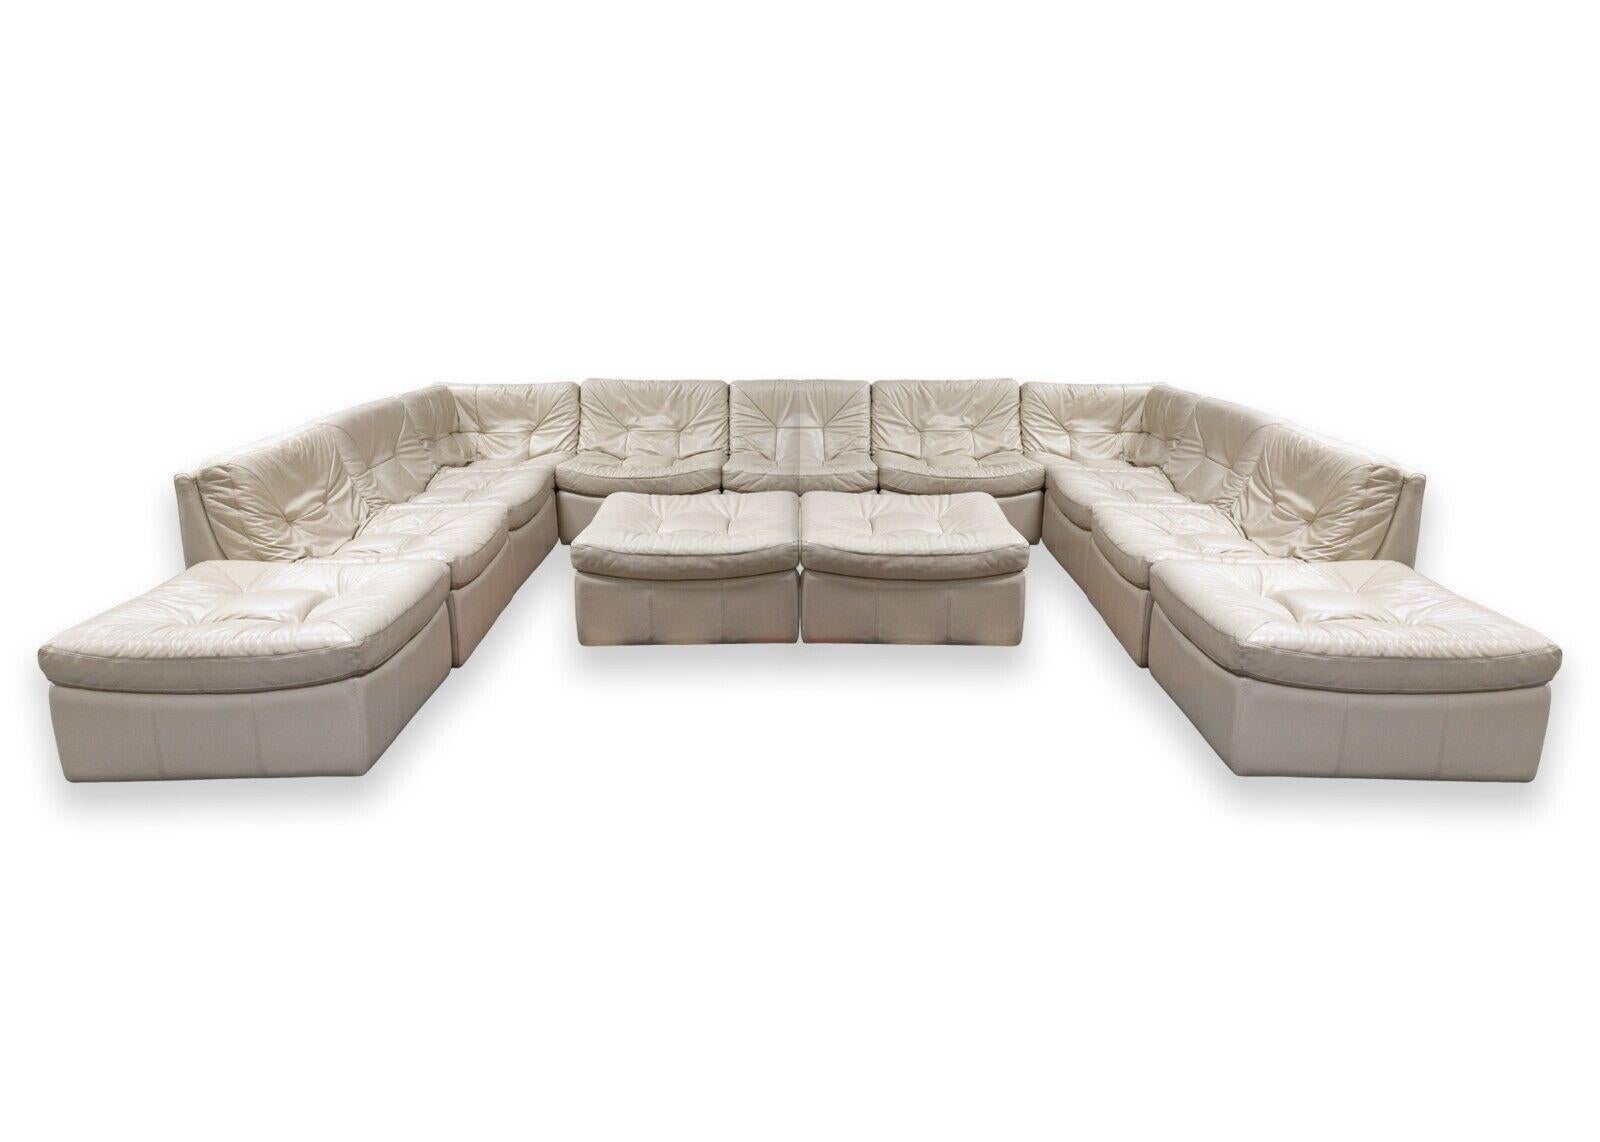 A Chateau d'Ax 13 piece sofa sectional. This is an absolutely massive leather sofa sectional featuring a 13 piece design, including 4 modular ottomans. The leather on this sectional is a very clean cream/beige color, very neutral and very